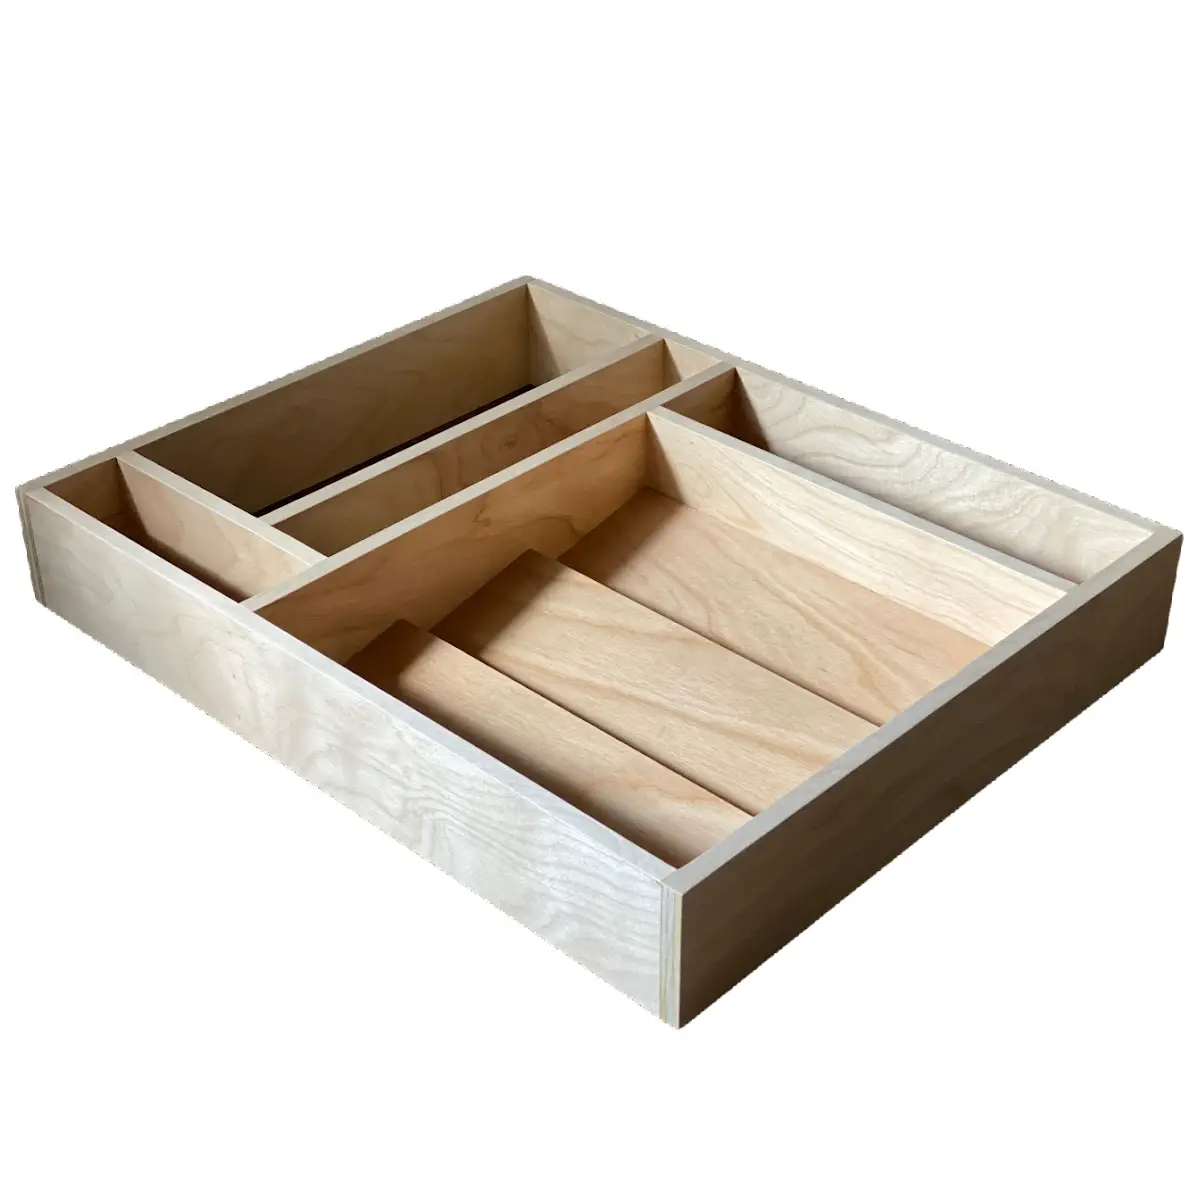 https://www.simplicityinthesouth.com/wp-content/uploads/2023/04/custom-made-drawer-organizer-for-makeup-or-spice-jars-angled-compartments.jpeg